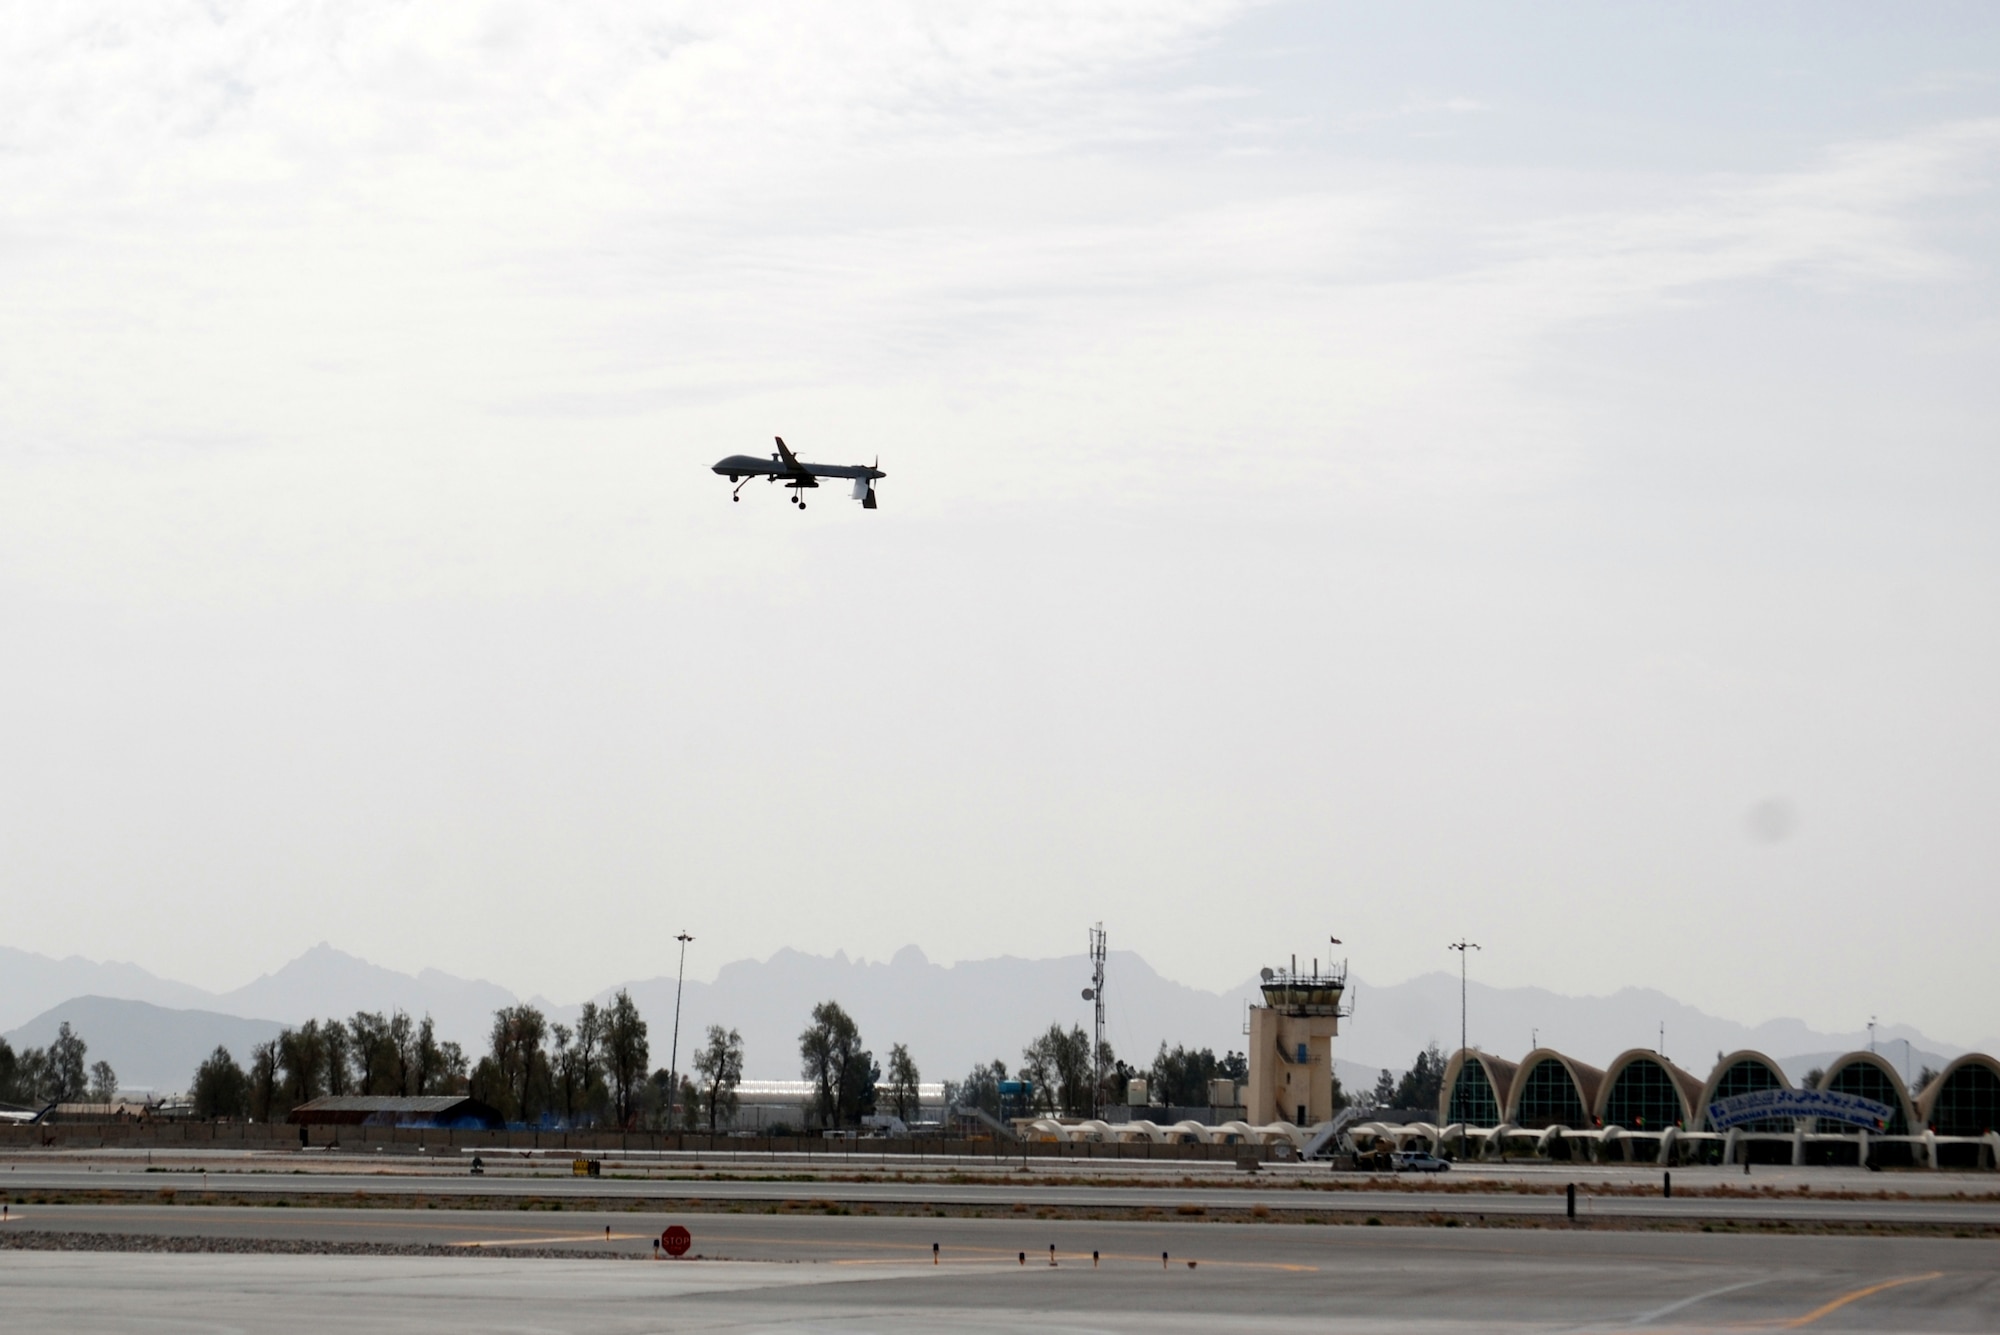 An MQ-1 Predator departs Kandahar Airfield, March 20, 2014. The MQ-1 is assigned to and operated by the 451st Air Expeditionary Group. (U.S. Air Force photo by Capt. Brian Wagner/Released)